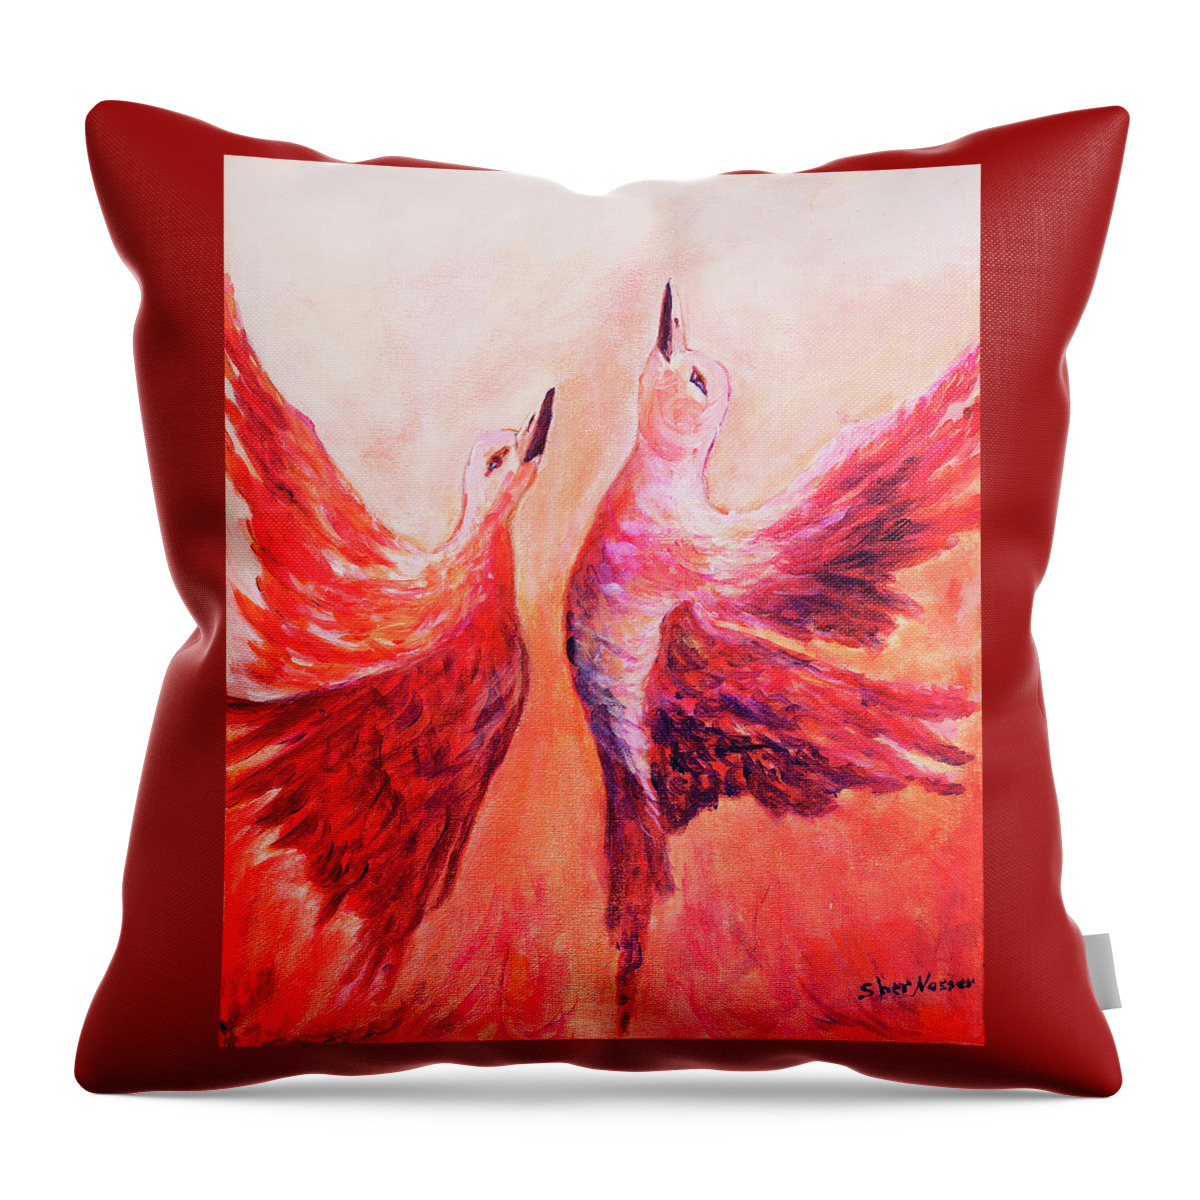 Sher Nasser Artist Throw Pillow featuring the painting Towards Heaven Canadian Geese by Sher Nasser Artist